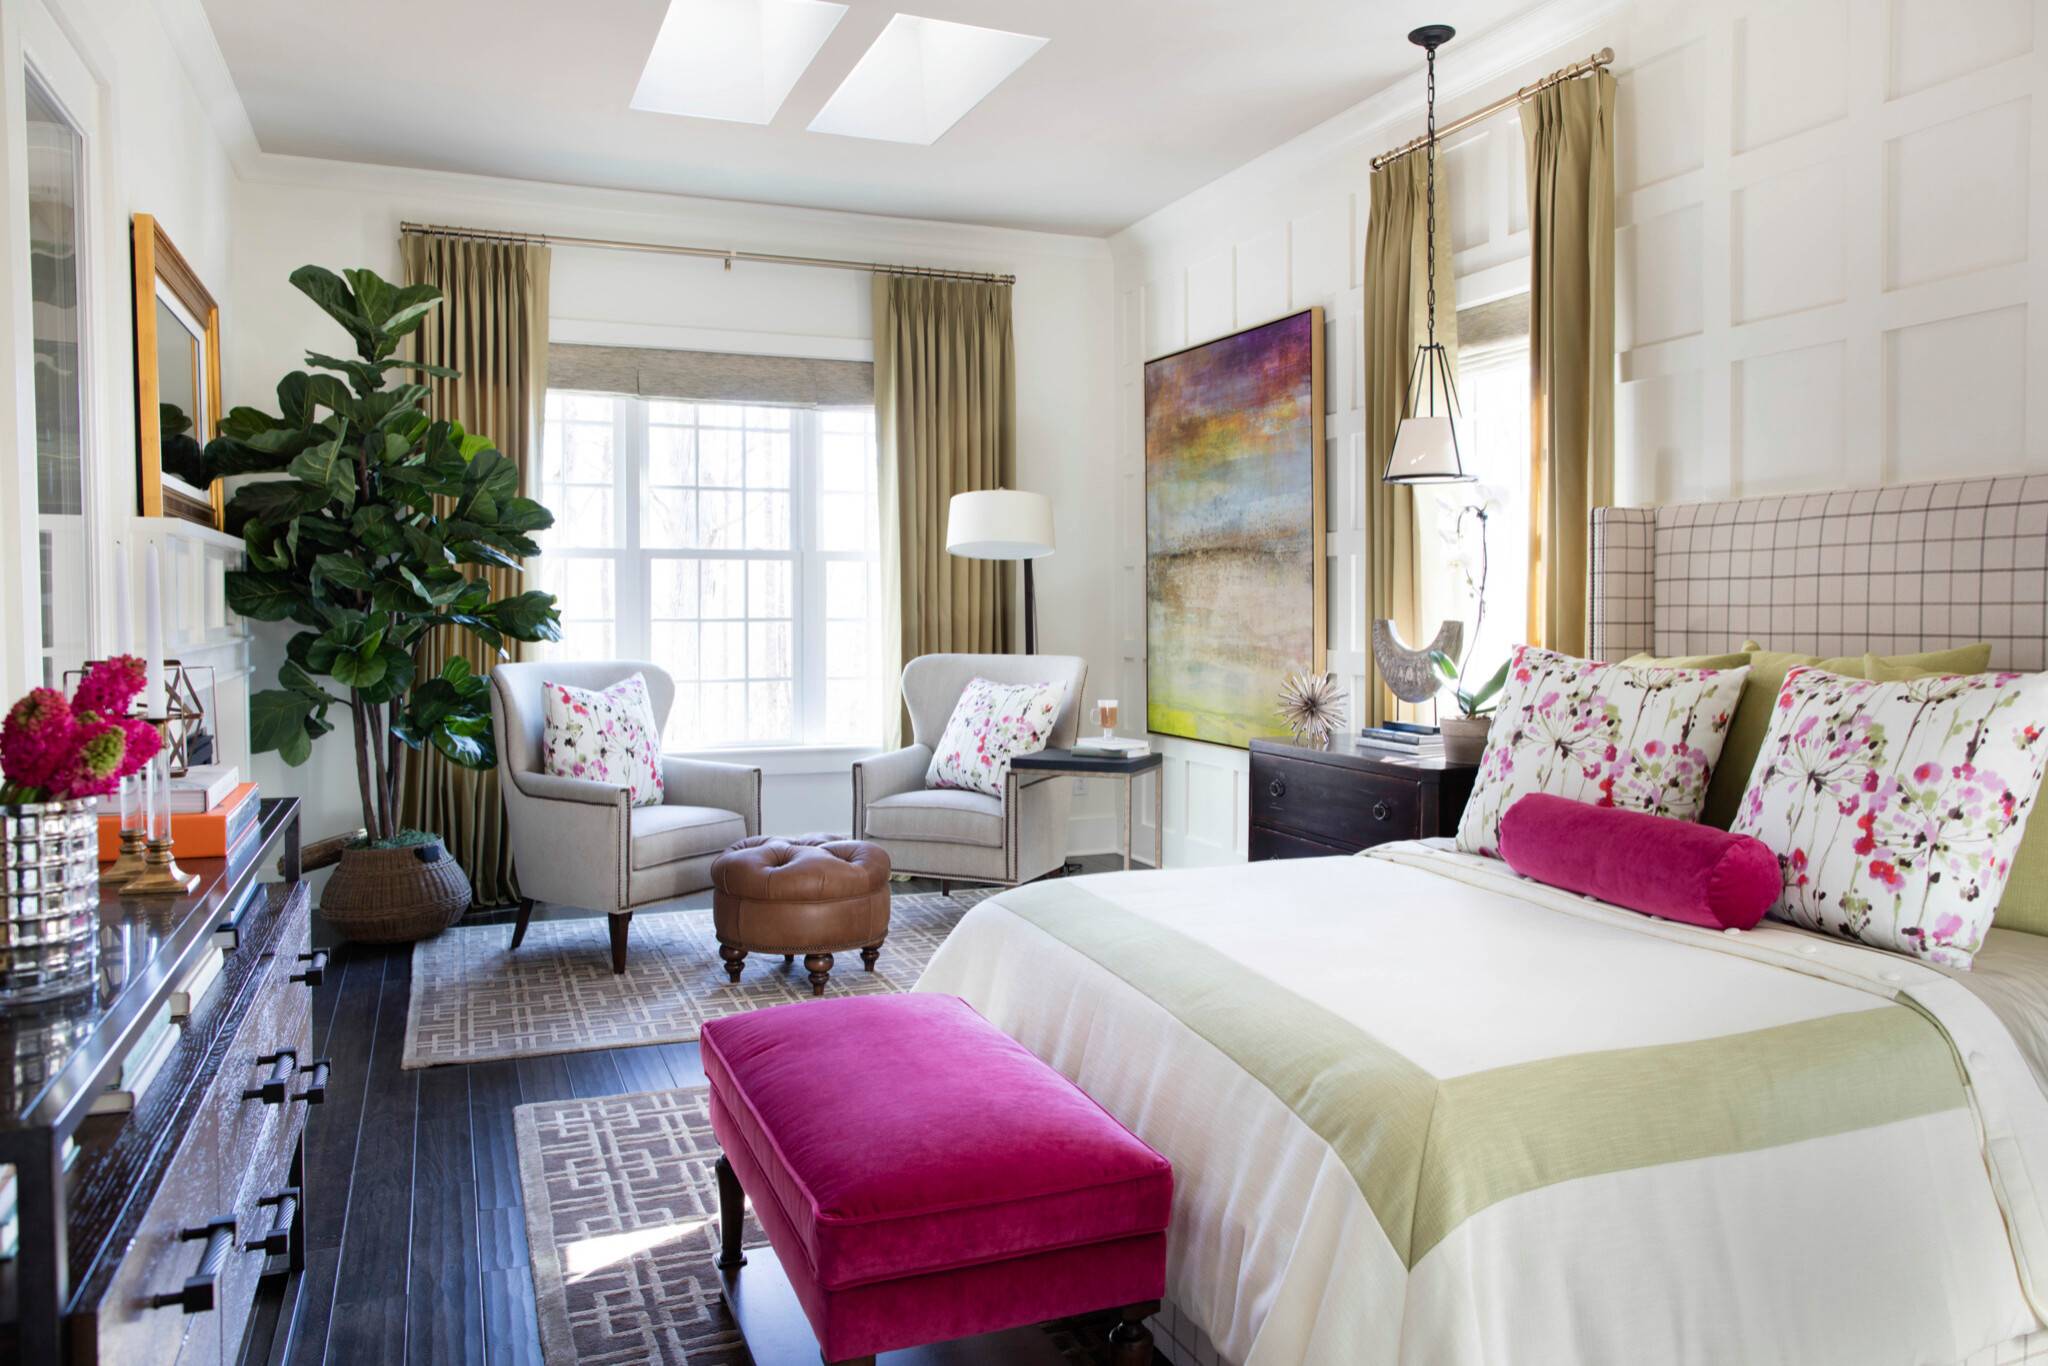 Hot pink is a versatile color choice (from Houzz)